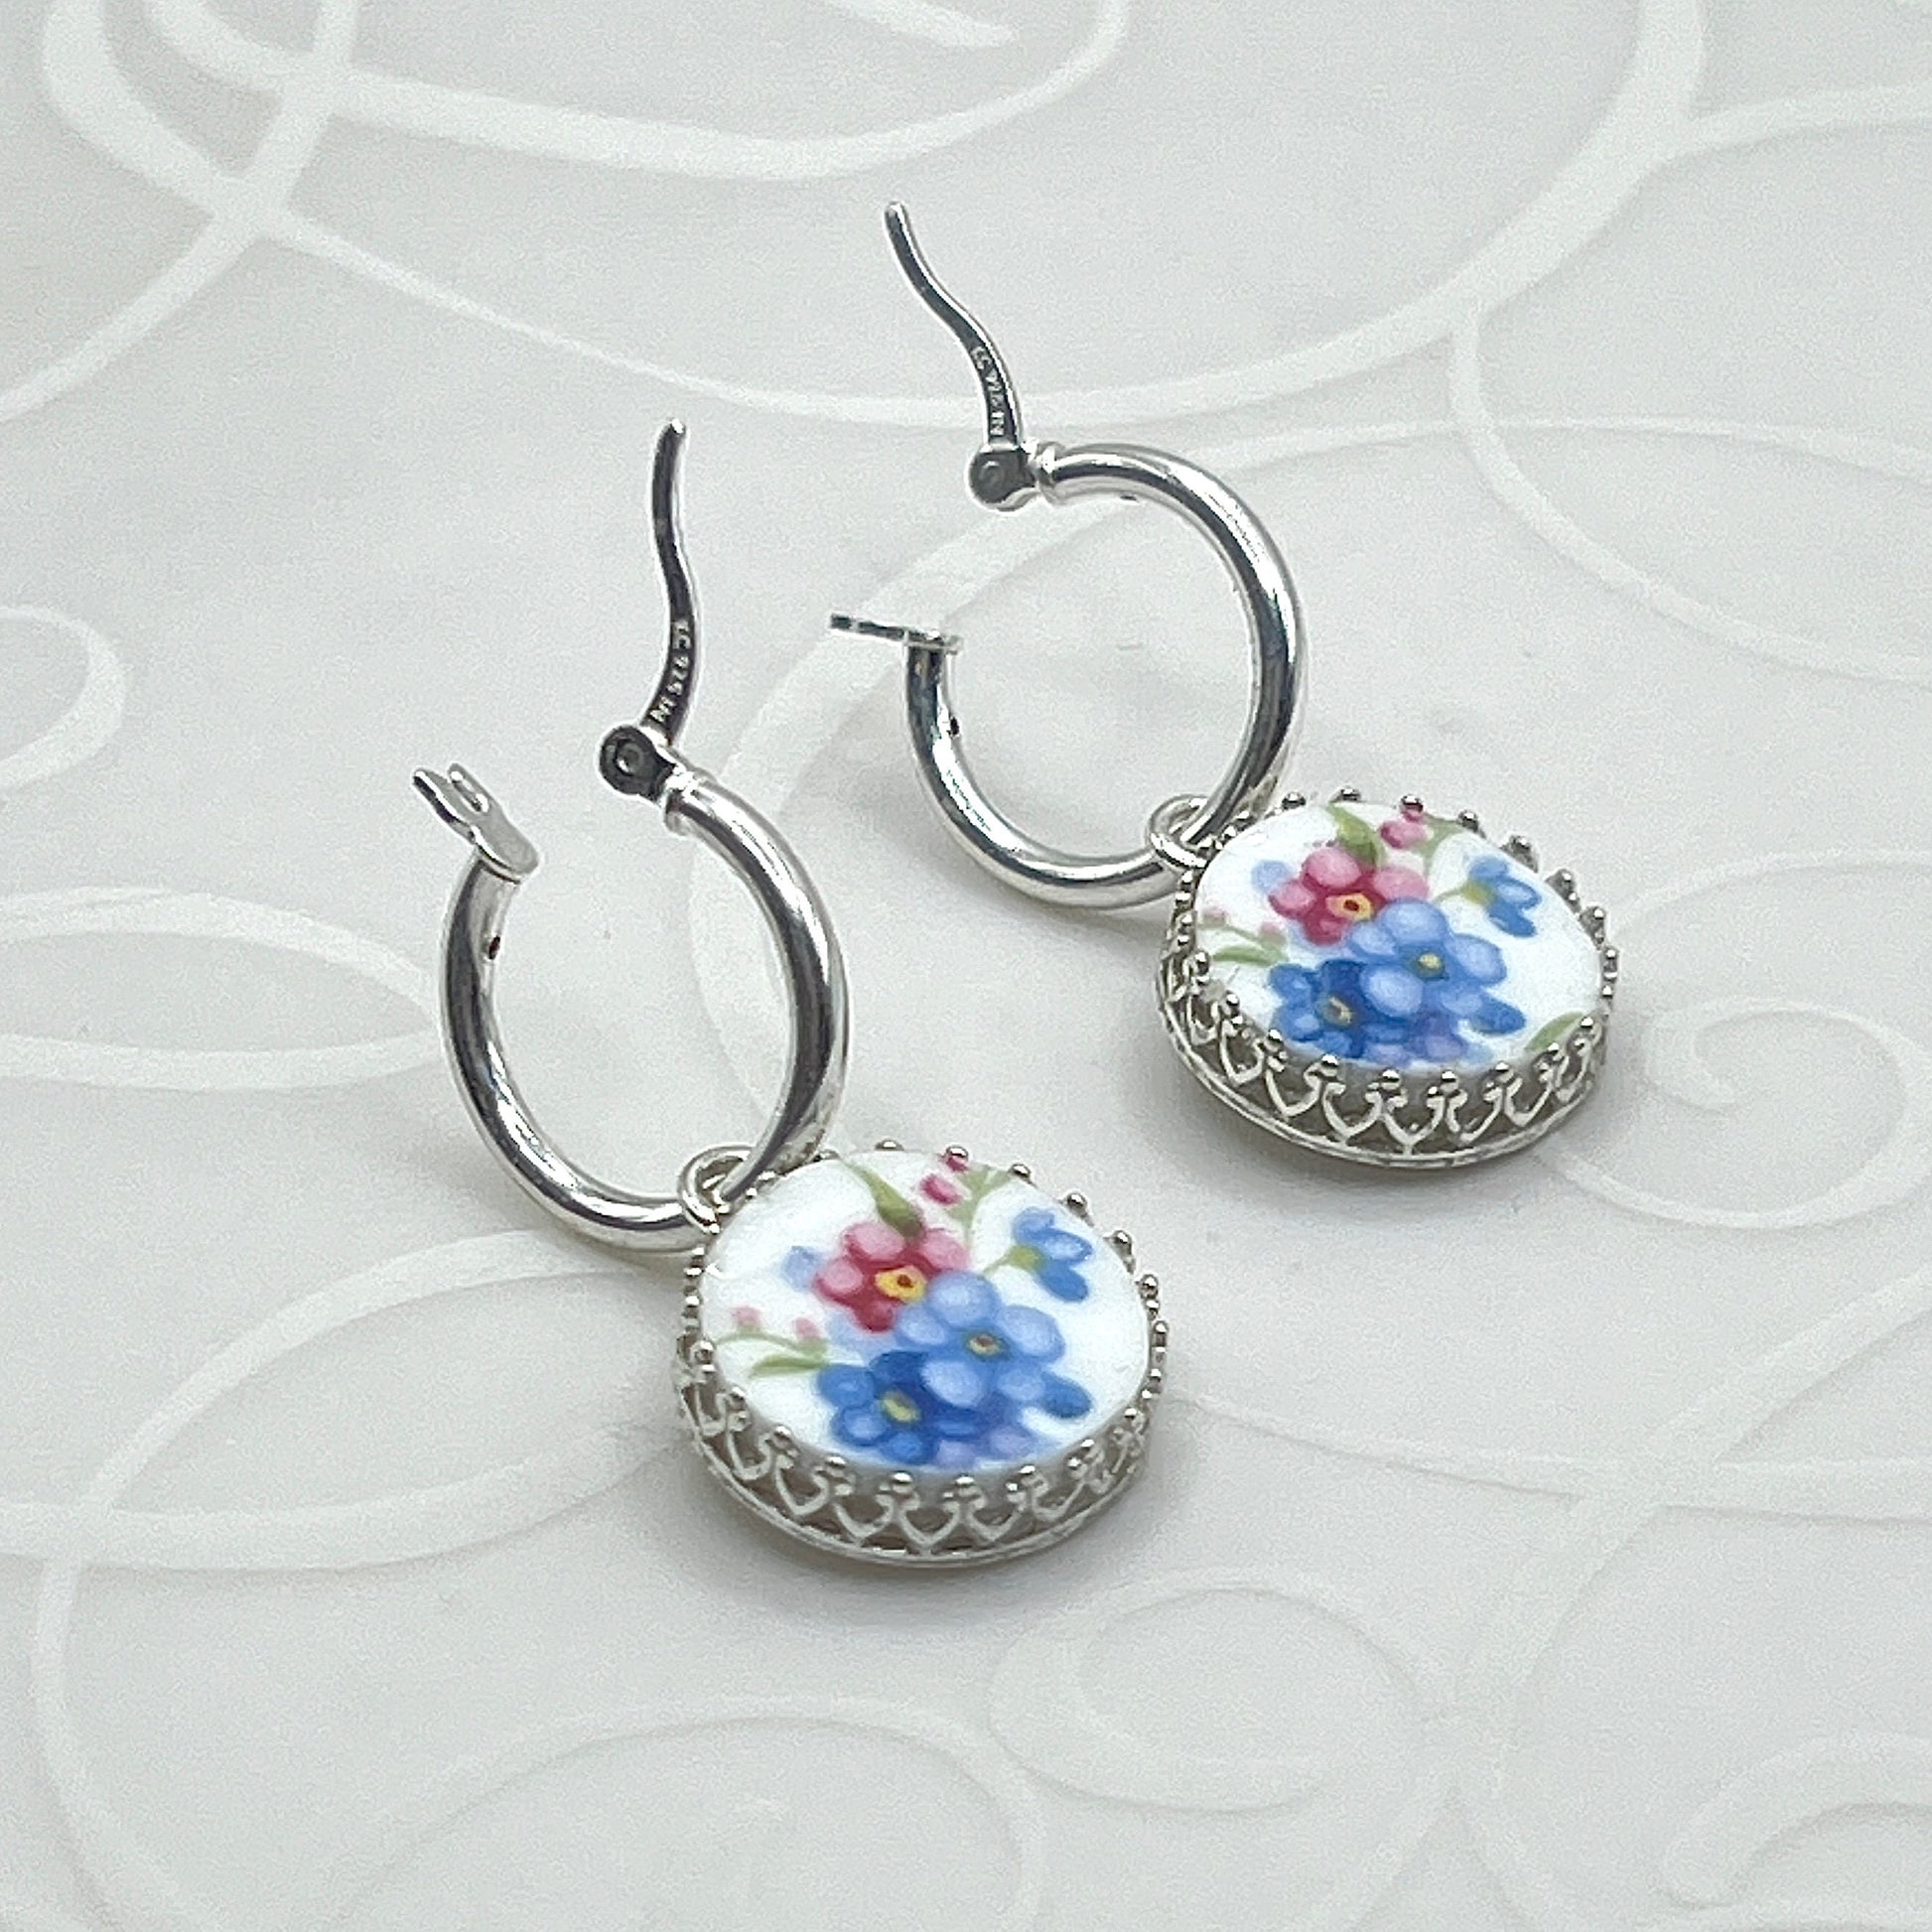 Forget Me Not Earrings, Broken China Jewelry, Sterling Silver Hoop Earrings, Unique Valentines Day Gift for Women